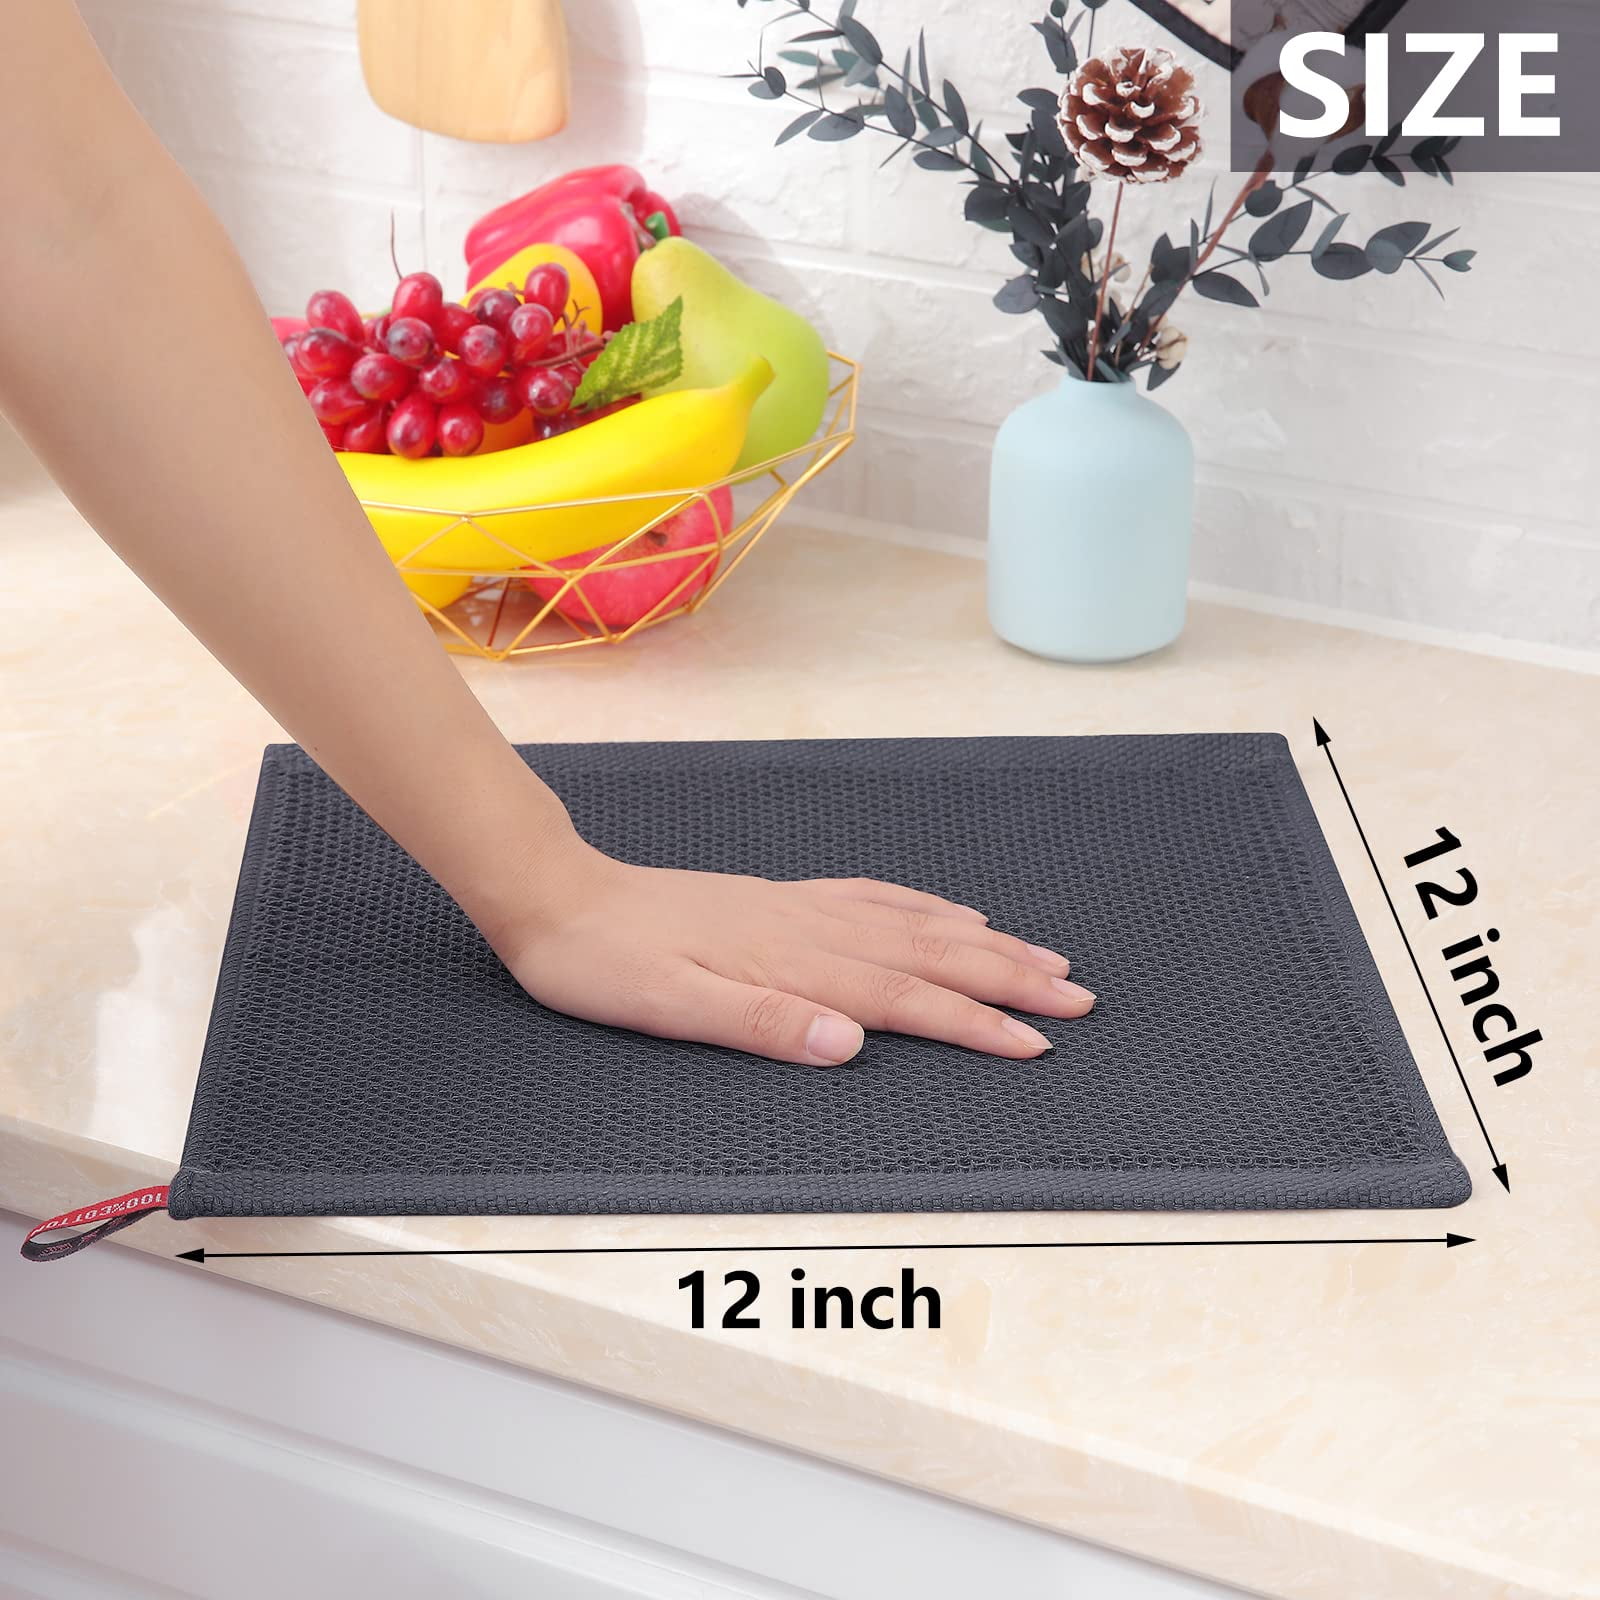 Howarmer Brick Red Kitchen Dish Towels, 100% Cotton Dish Cloths for Washing  Dishes, Super Soft and Absorbent Waffle Weave Dish Rags, 6 Pack